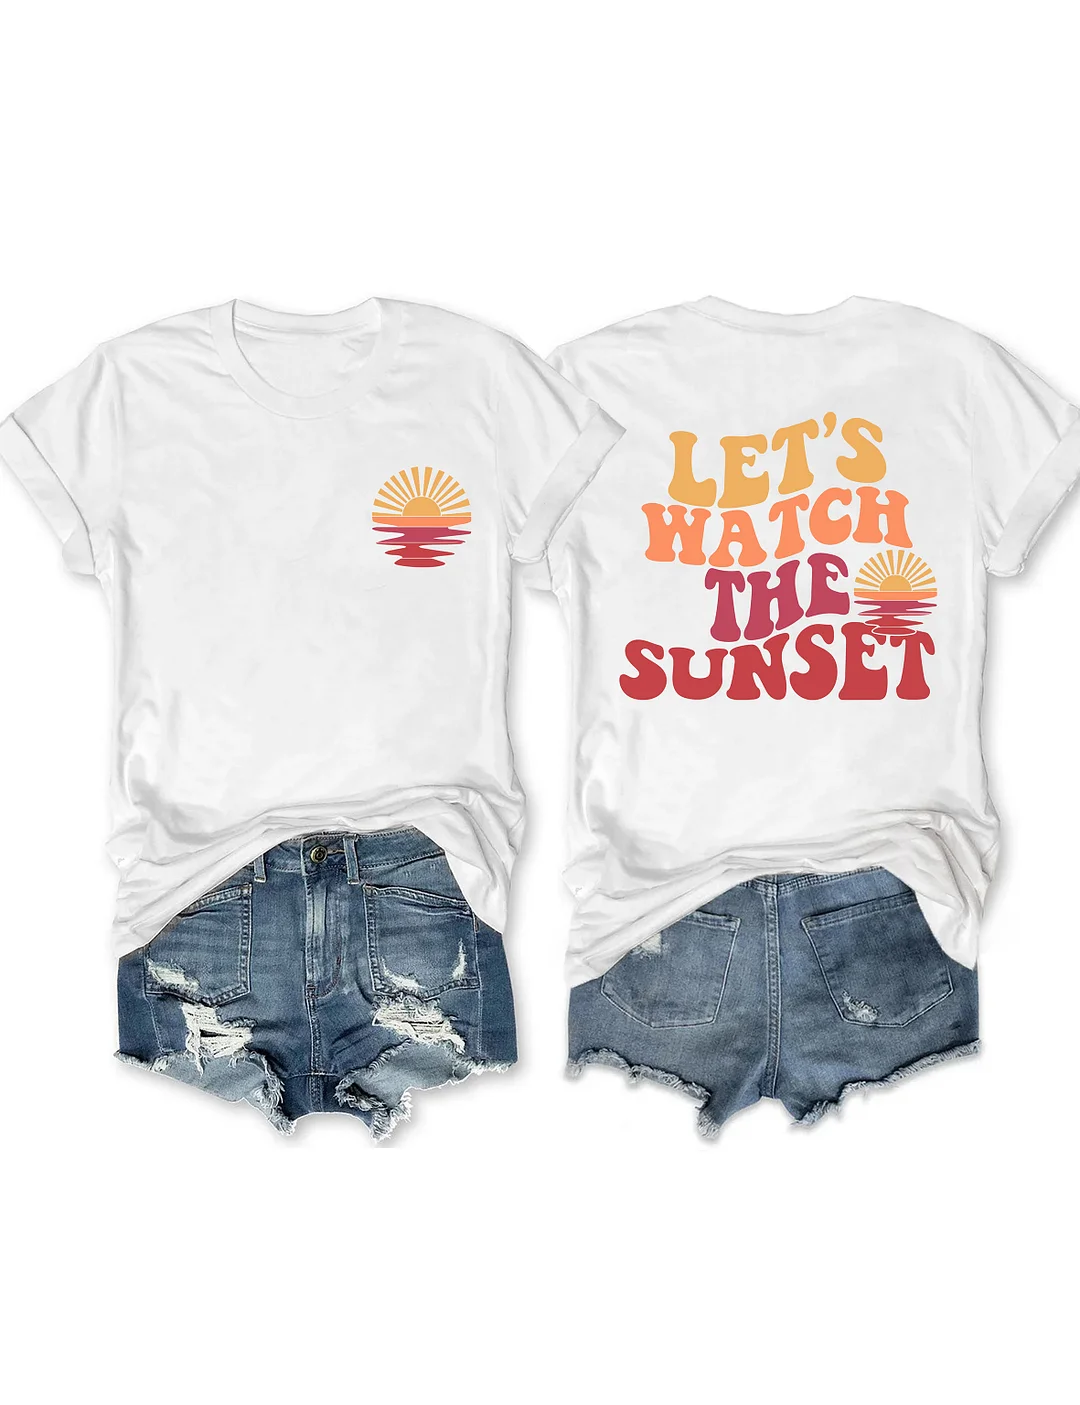 Lets Watch The Sunset T-shirt